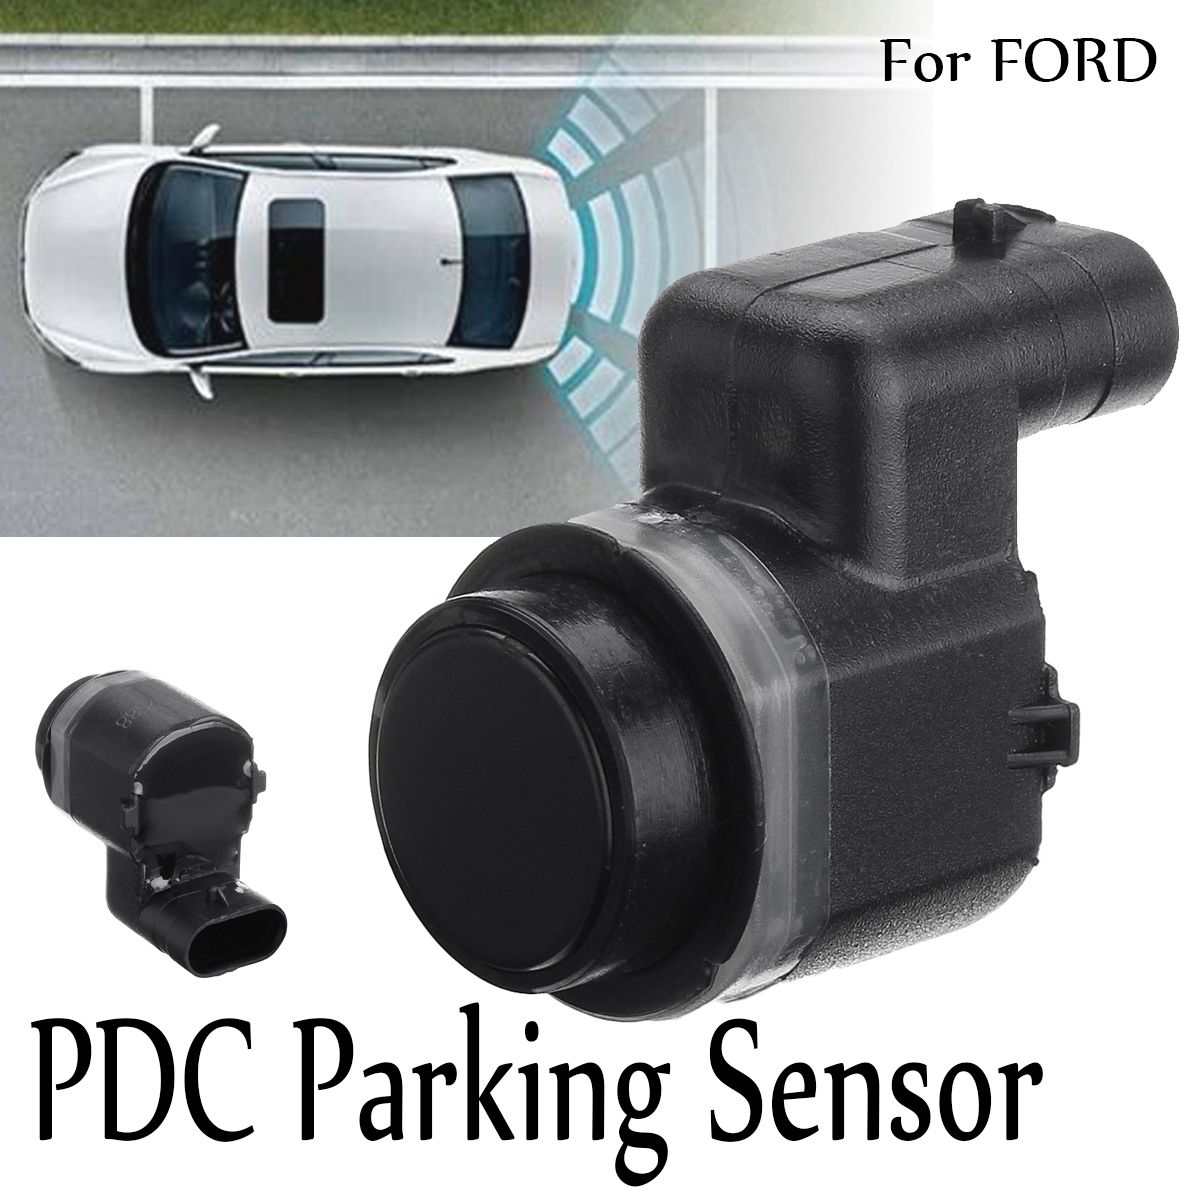 PDC-Parking-Sensor-Front-Outer-And-Rear-for-Ford-S-Max-Galaxy-Wa6-Mpv-Mondeo-Mk4-1284049